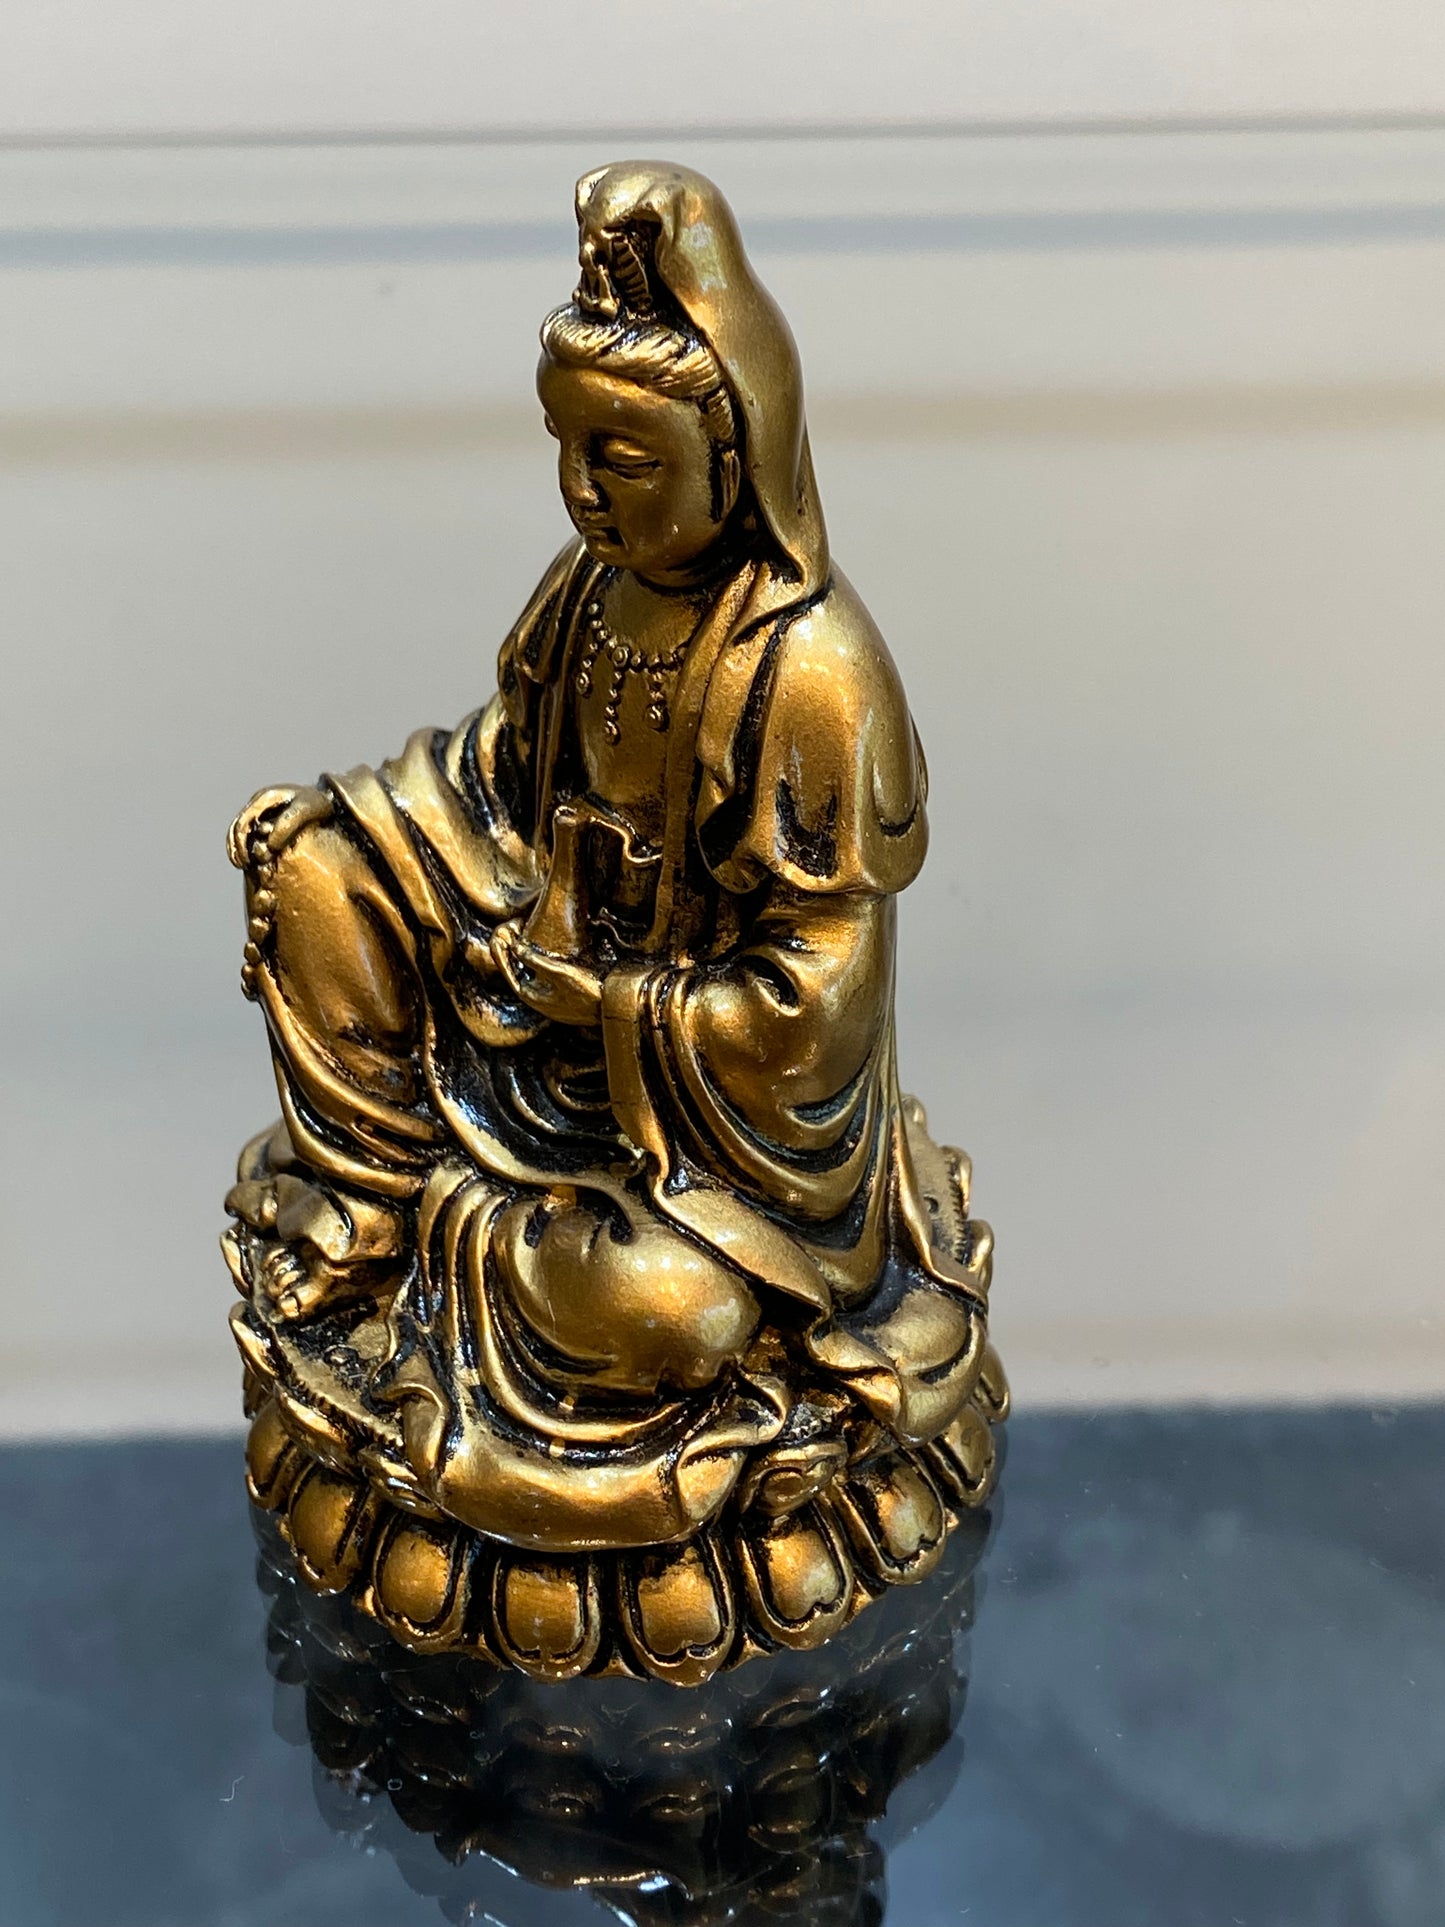 Gold Kwan Yin Figurine, Goddess of mercy and compassion seated on a Lotus Flower